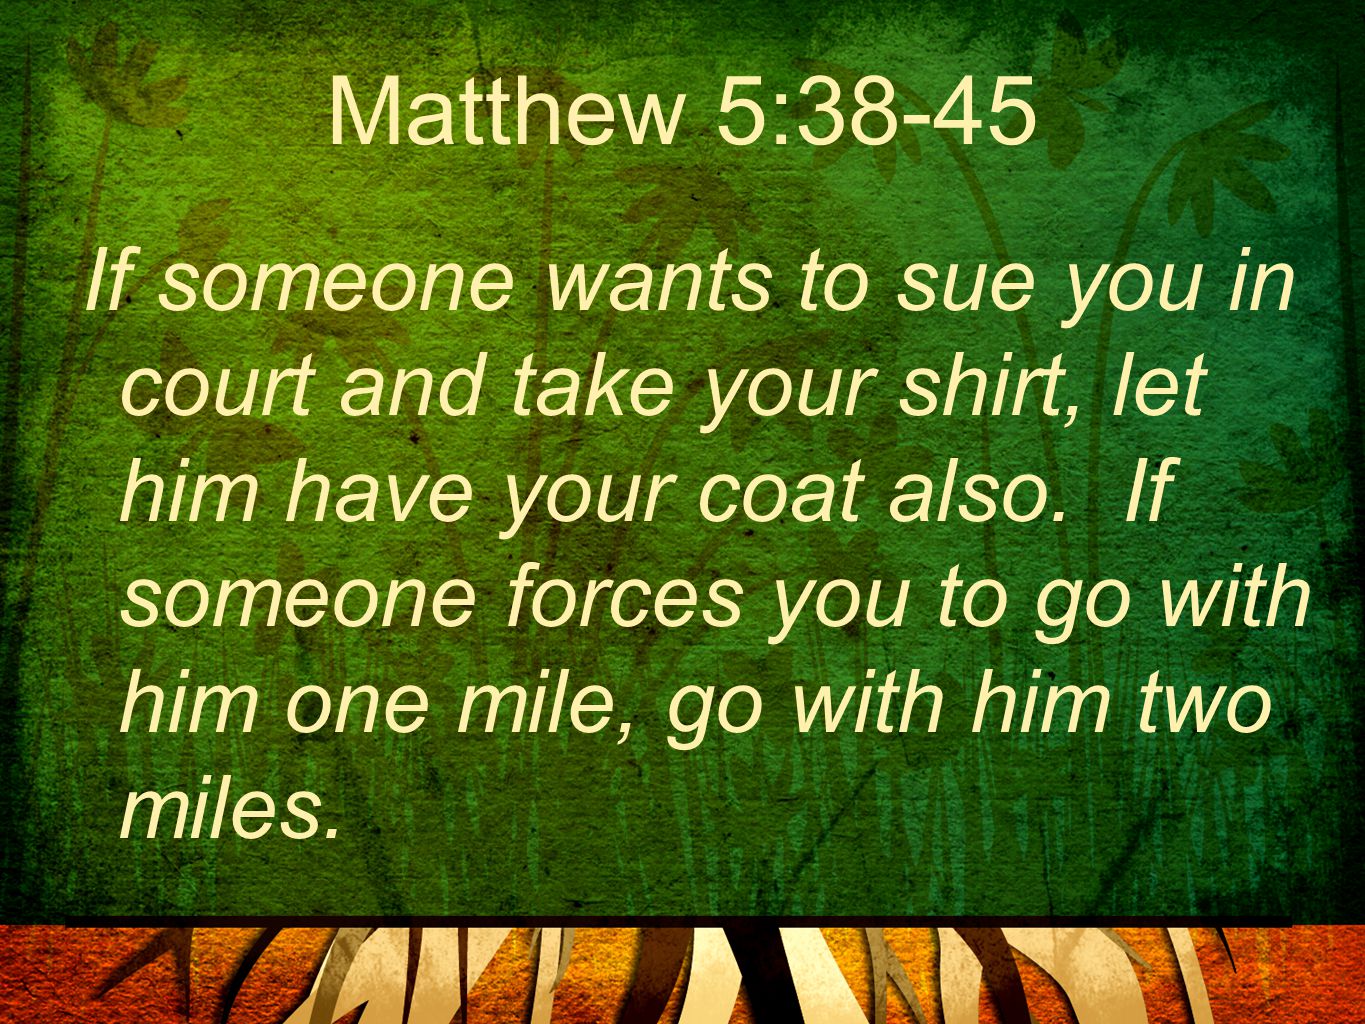 Matthew 5:38-45 If someone wants to sue you in court and take your shirt, let him have your coat also.